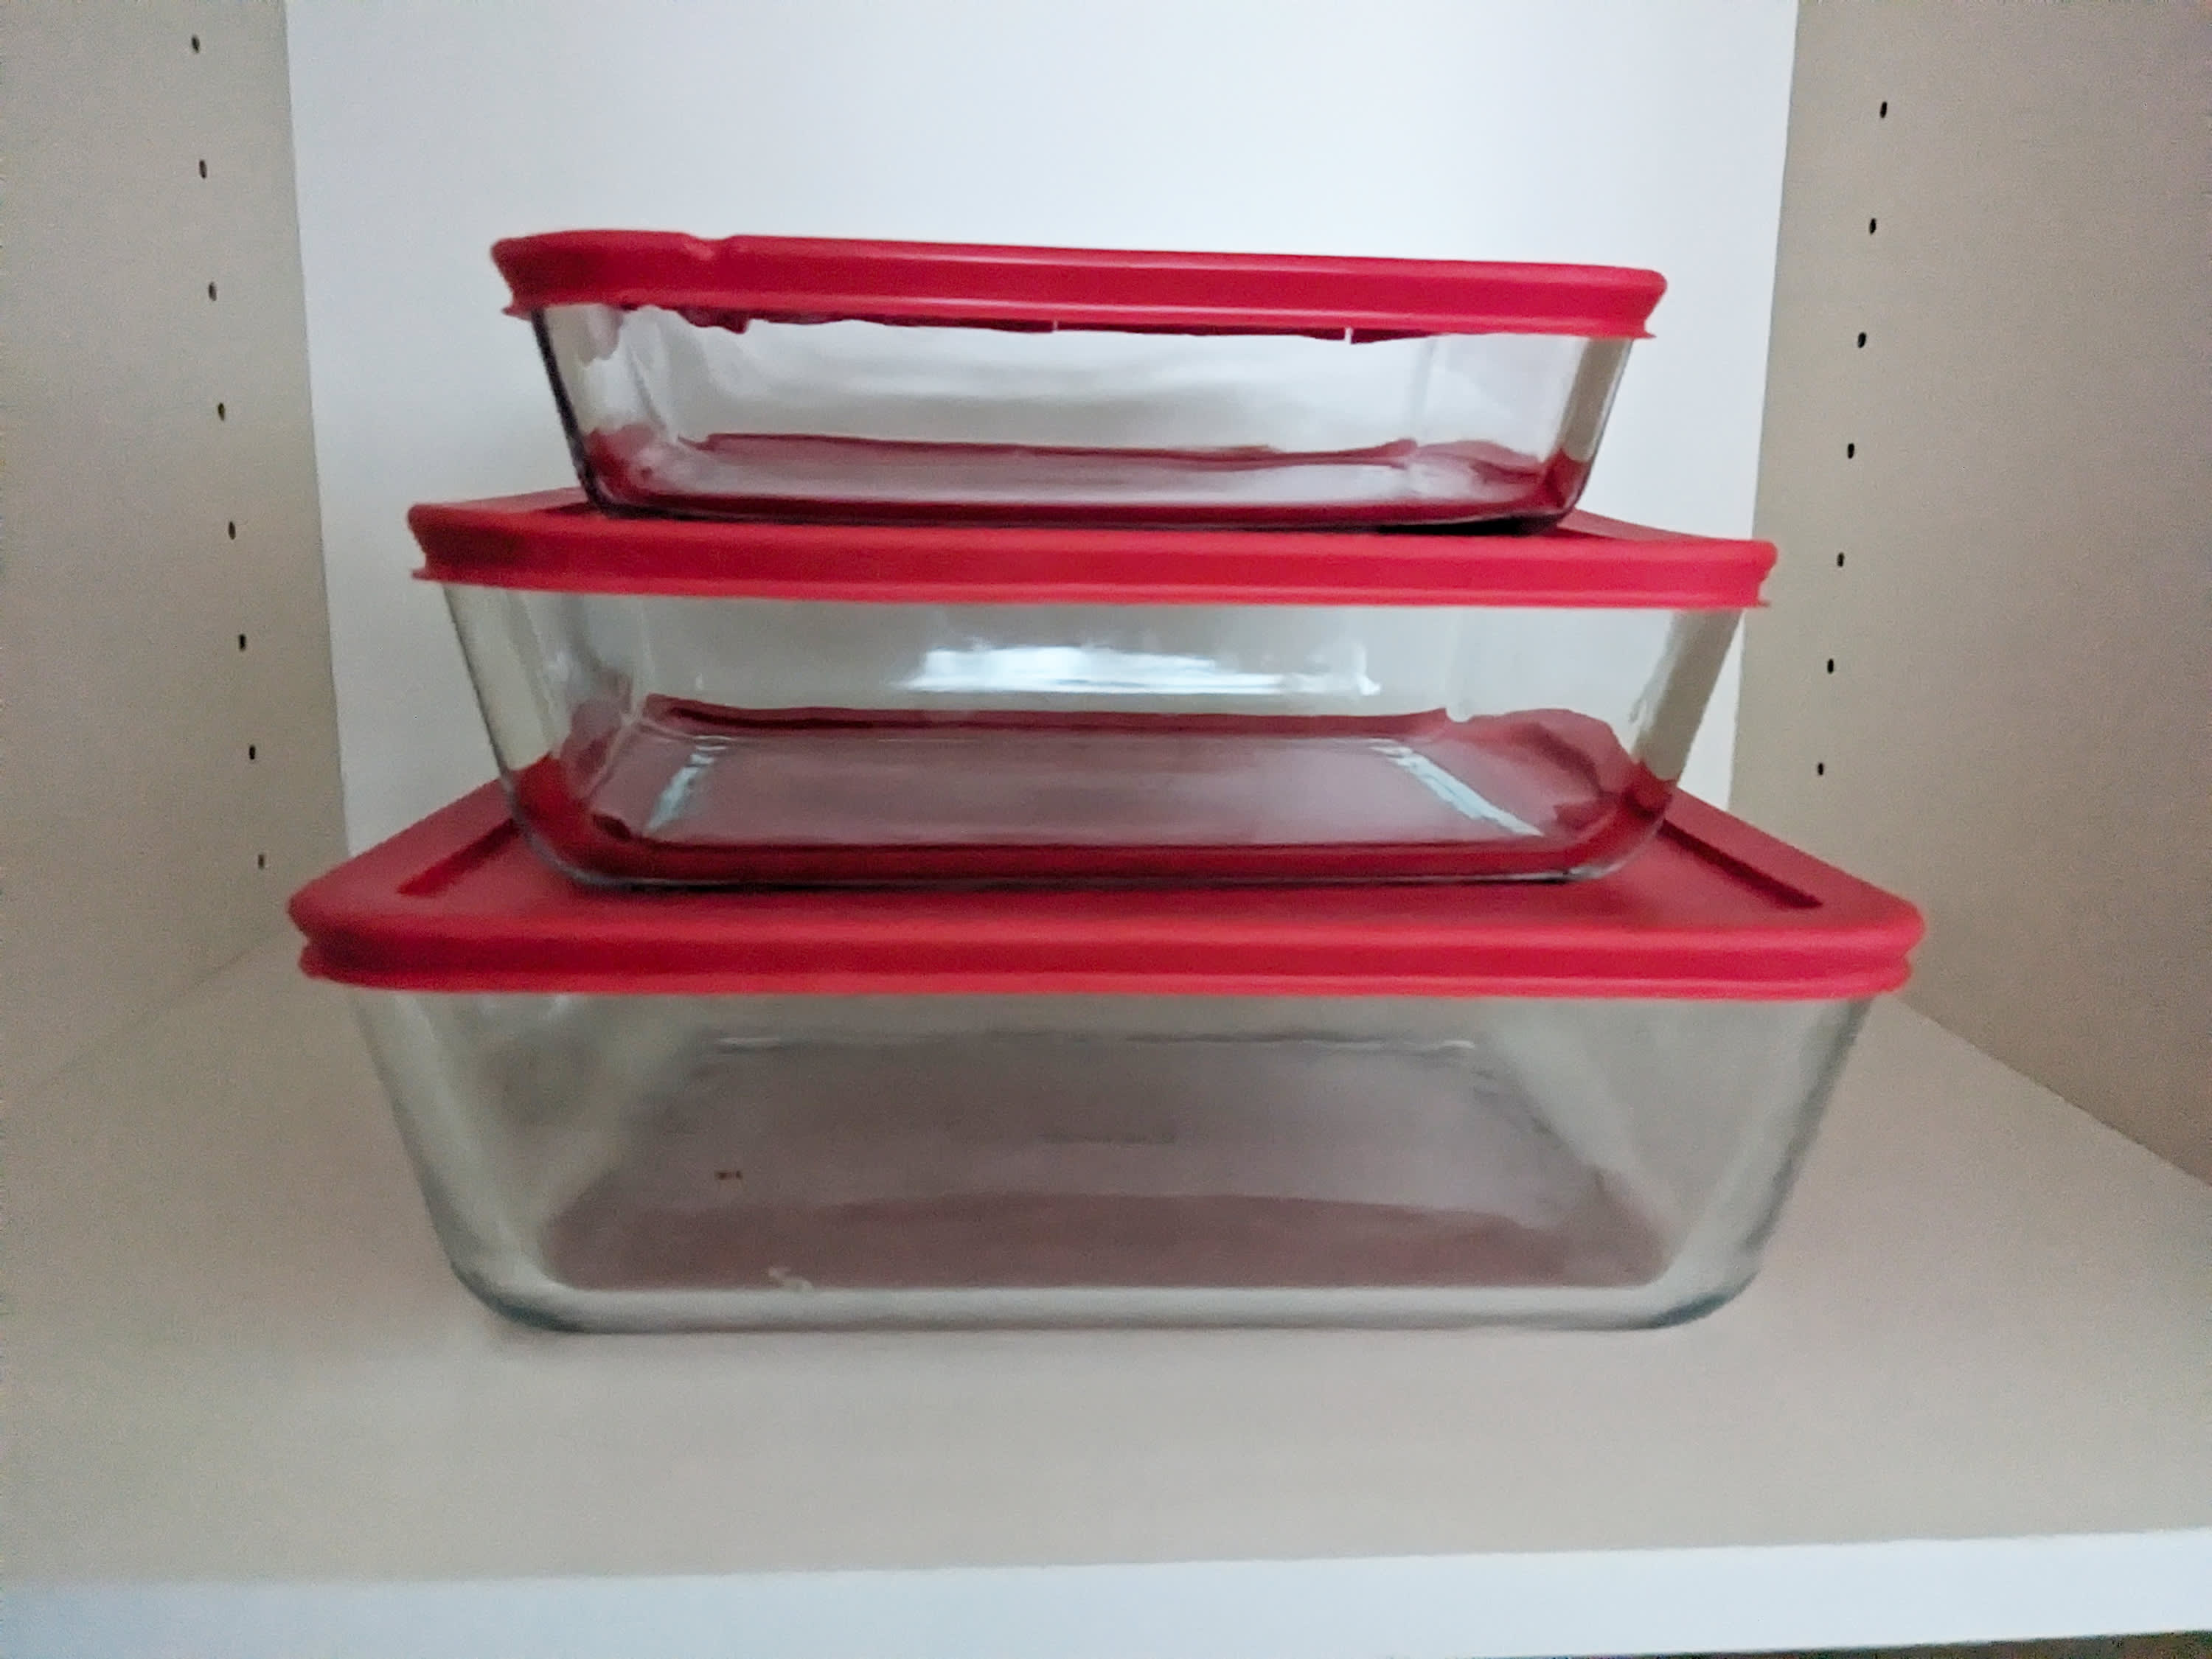 https://cdn.apartmenttherapy.info/image/upload/v1689094346/k/shopping/2023-07/pyrex-container-prime-day/pyrex-stack-2.jpg